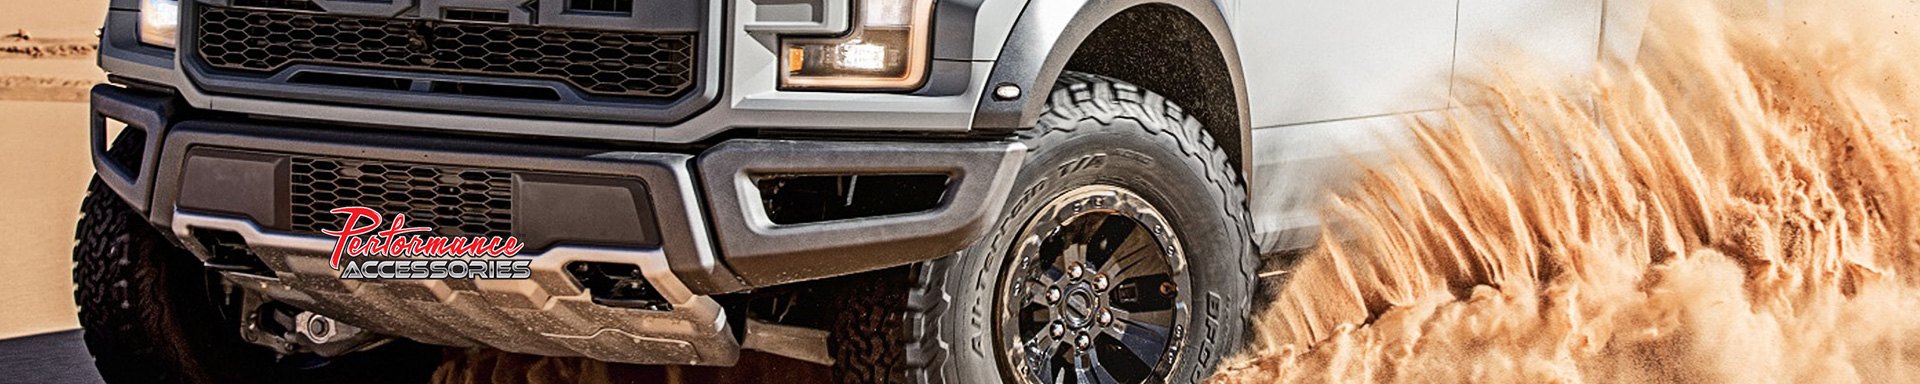 Performance Accessories Off-Road Bumpers